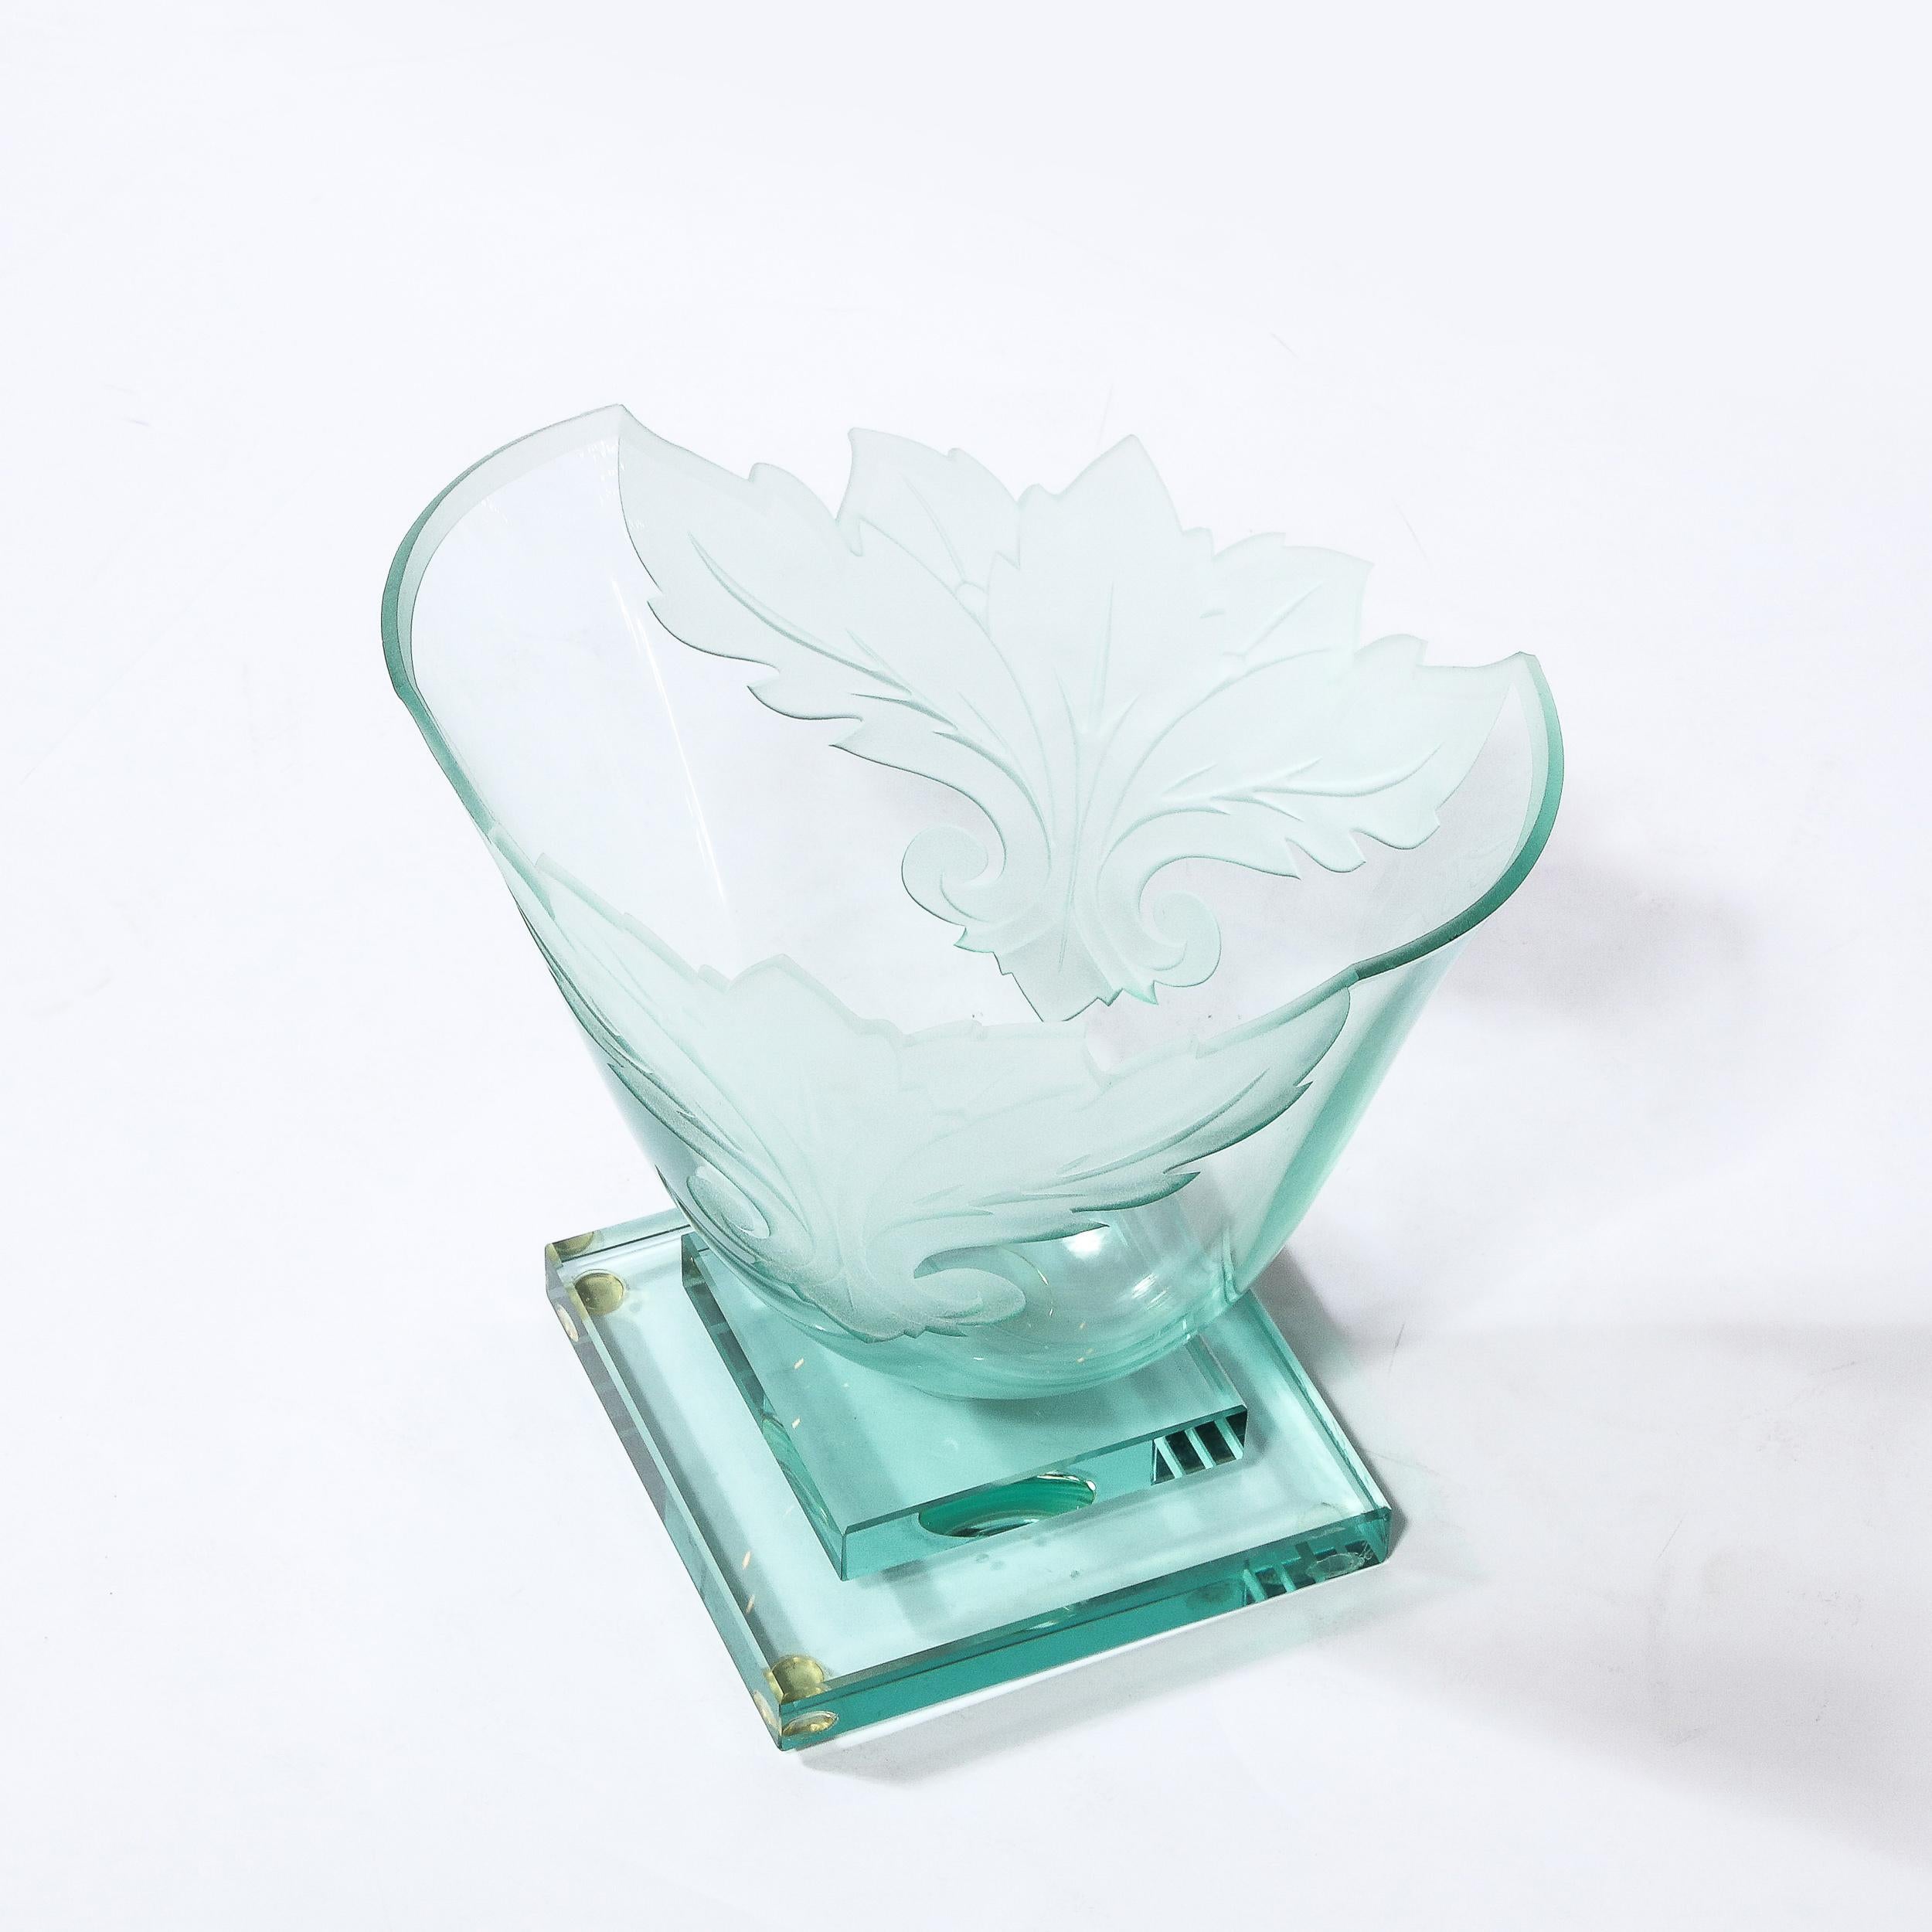 Frosted and Etched Cut Glass Leaf Vase/Bowl on Geometric Base by Robert Guenther For Sale 9